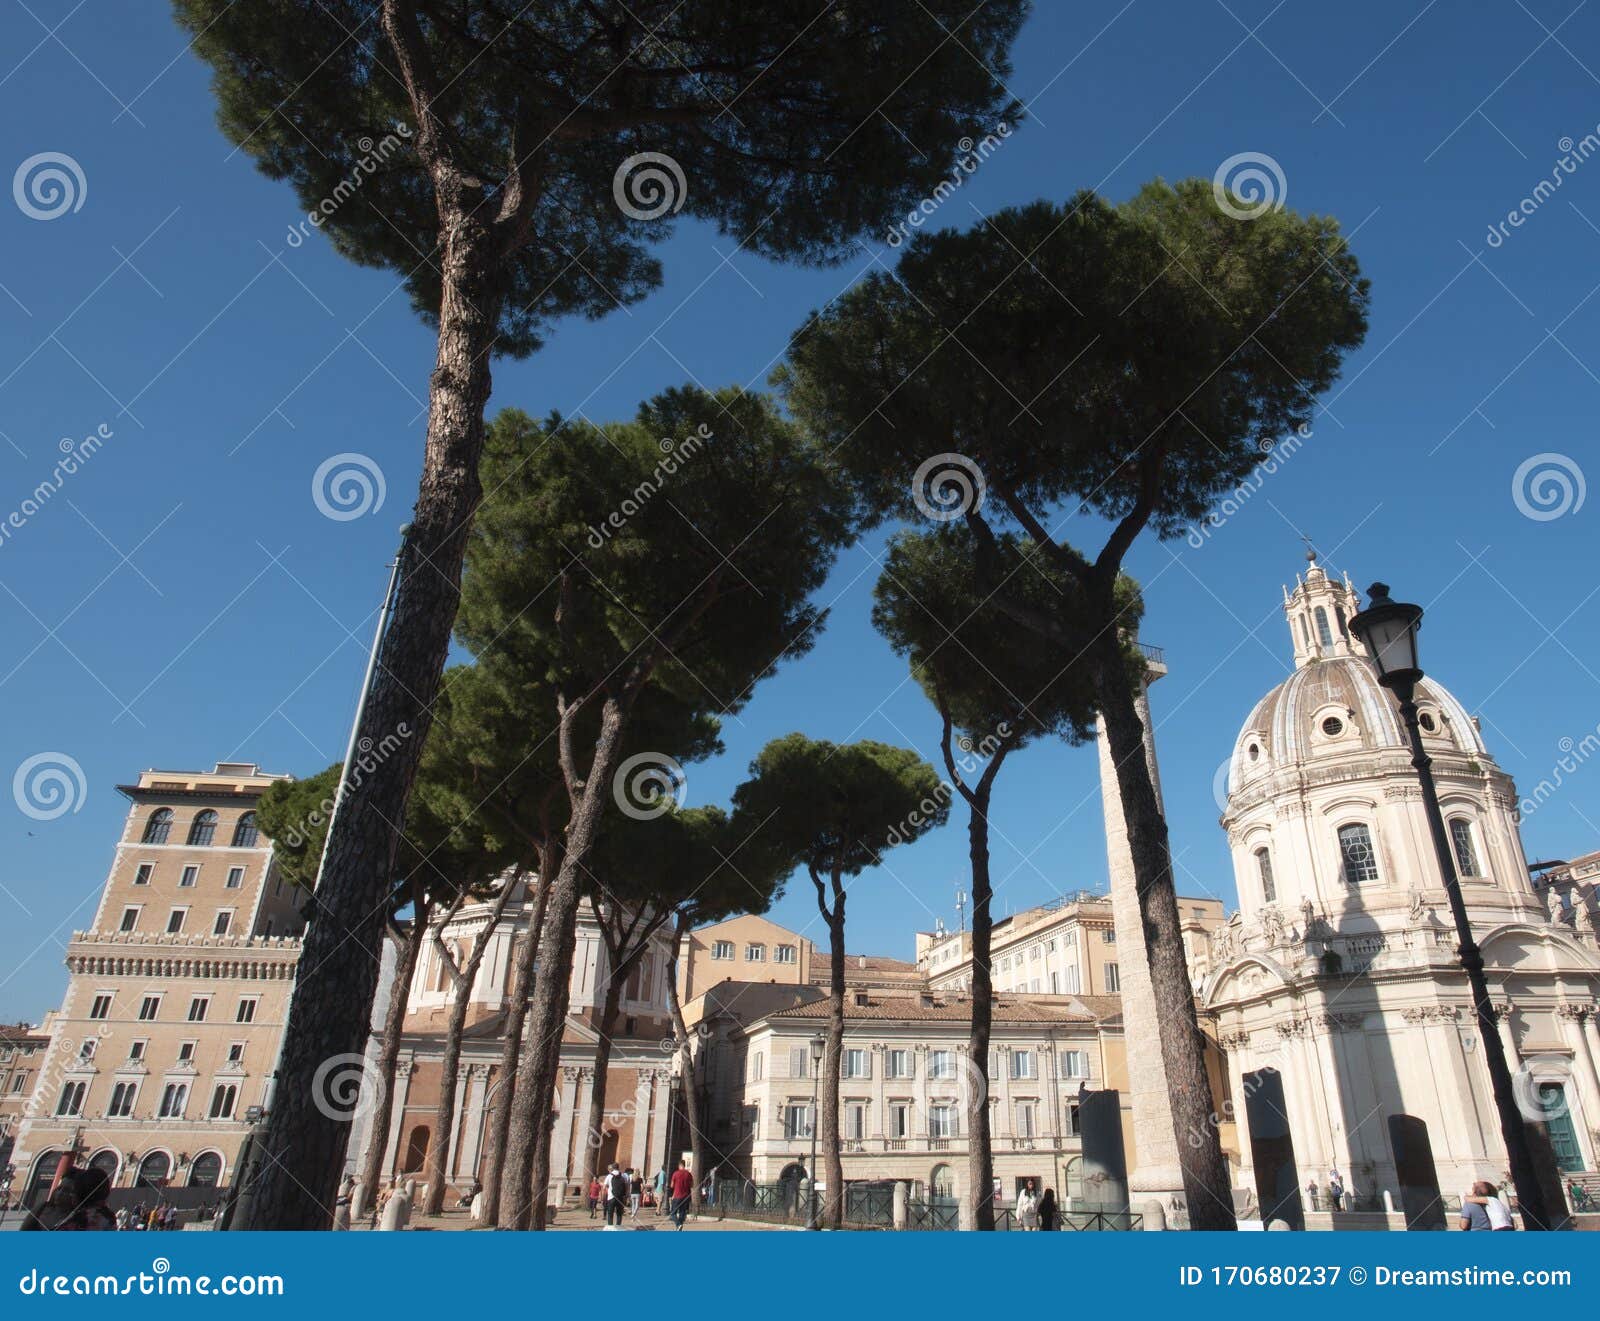 trees along a gravel path in rome leading to piazza venetia